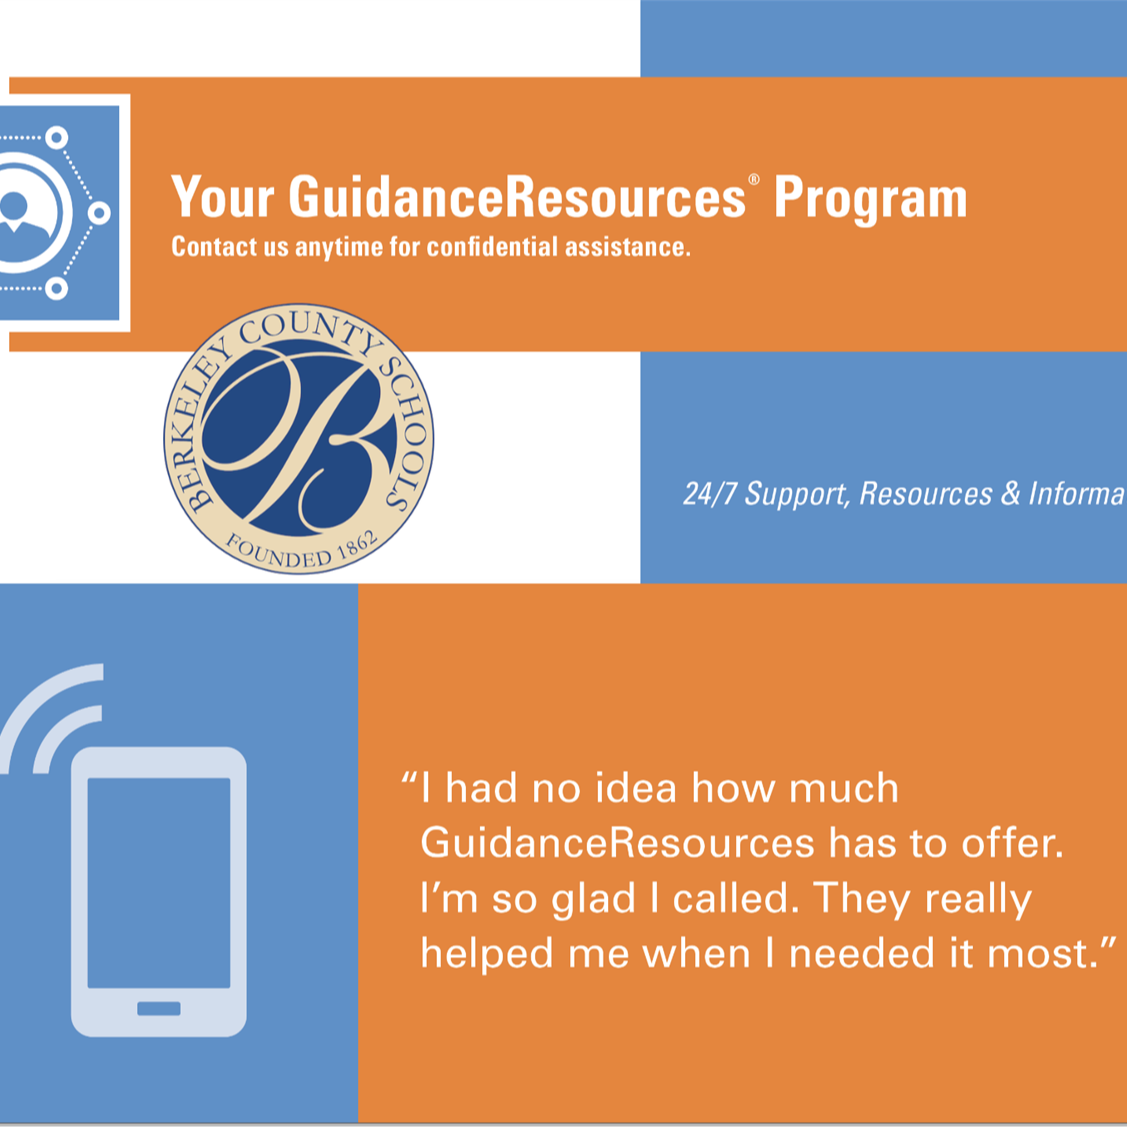 Guidance Resources Programs, 24/7 Support, Resources, and Information